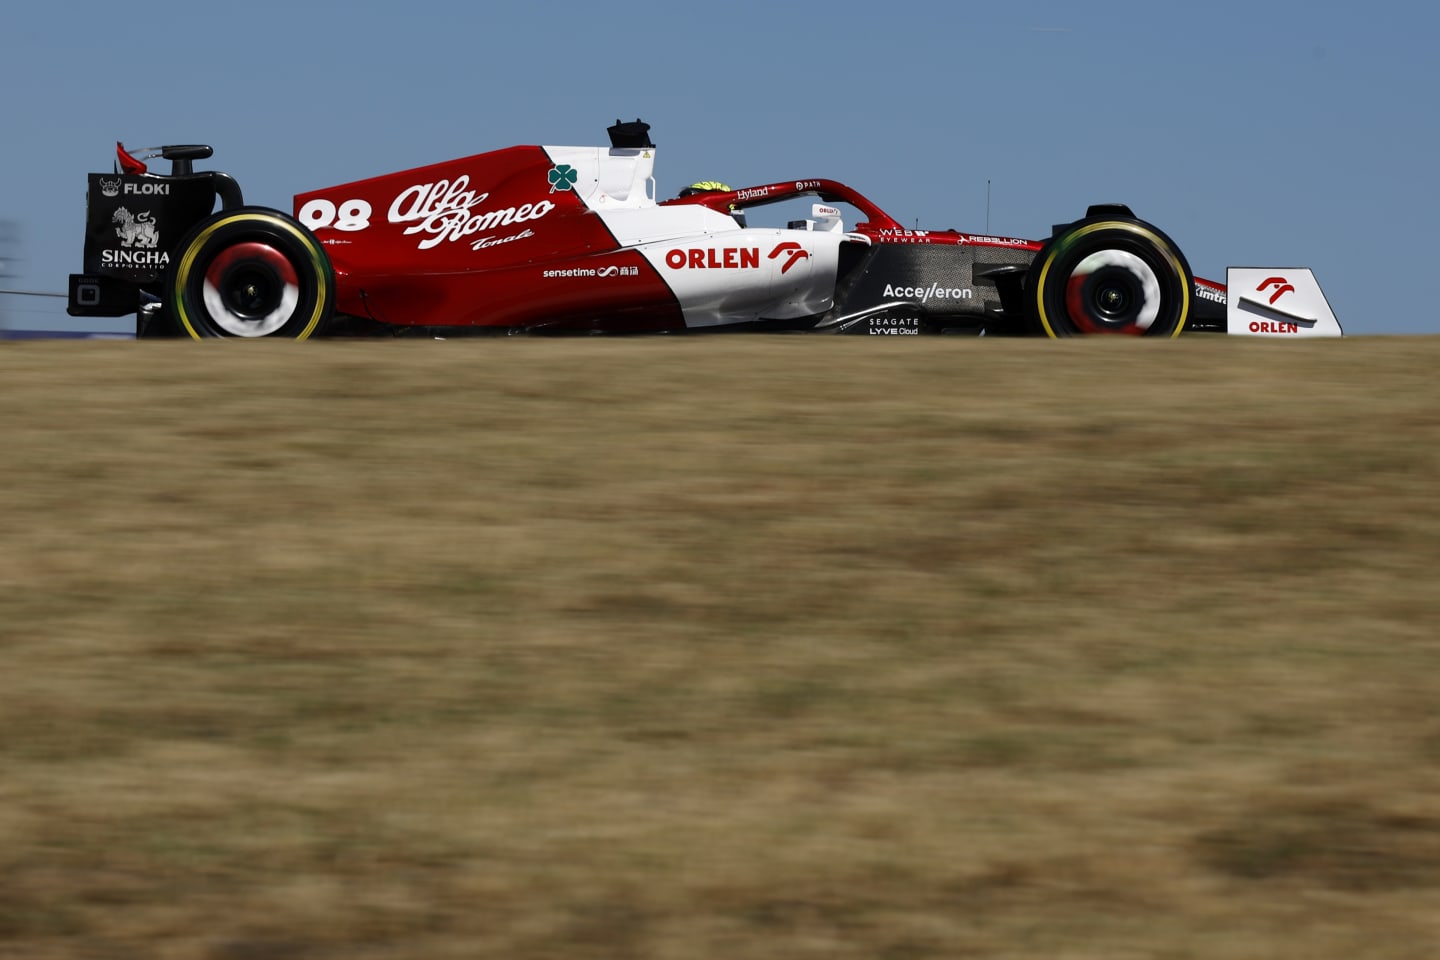 AUSTIN, TEXAS - OCTOBER 21: Theo Pourchaire of France driving the (98) Alfa Romeo F1 C42 Ferrari on track during practice ahead of the F1 Grand Prix of USA at Circuit of The Americas on October 21, 2022 in Austin, Texas. (Photo by Jared C. Tilton/Getty Images)